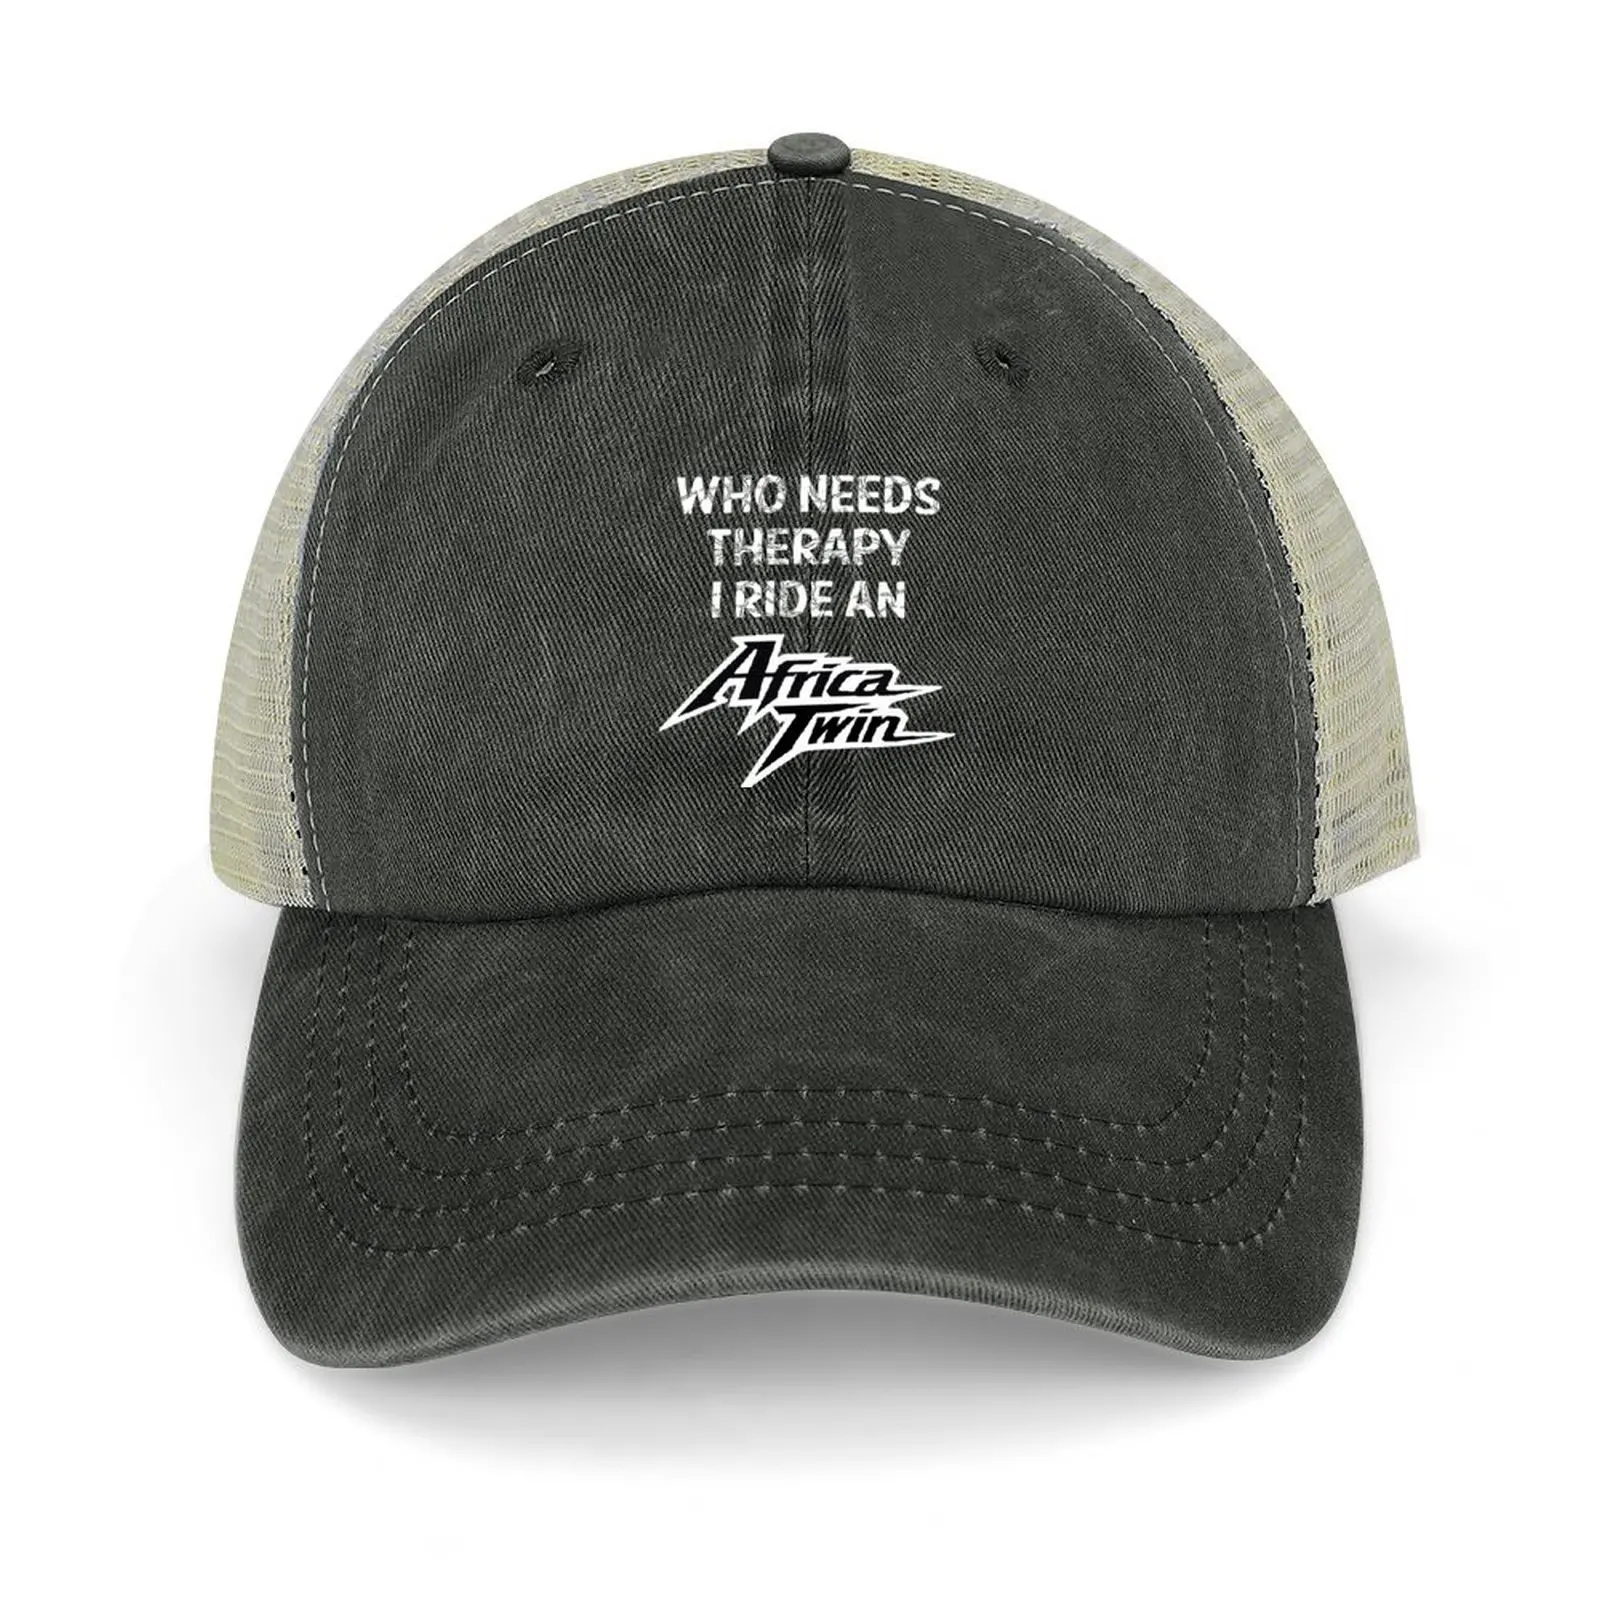 

Who Needs Therapy, I ride an Africa Twin Cowboy Hat Luxury Brand Luxury Cap Golf Women Men's